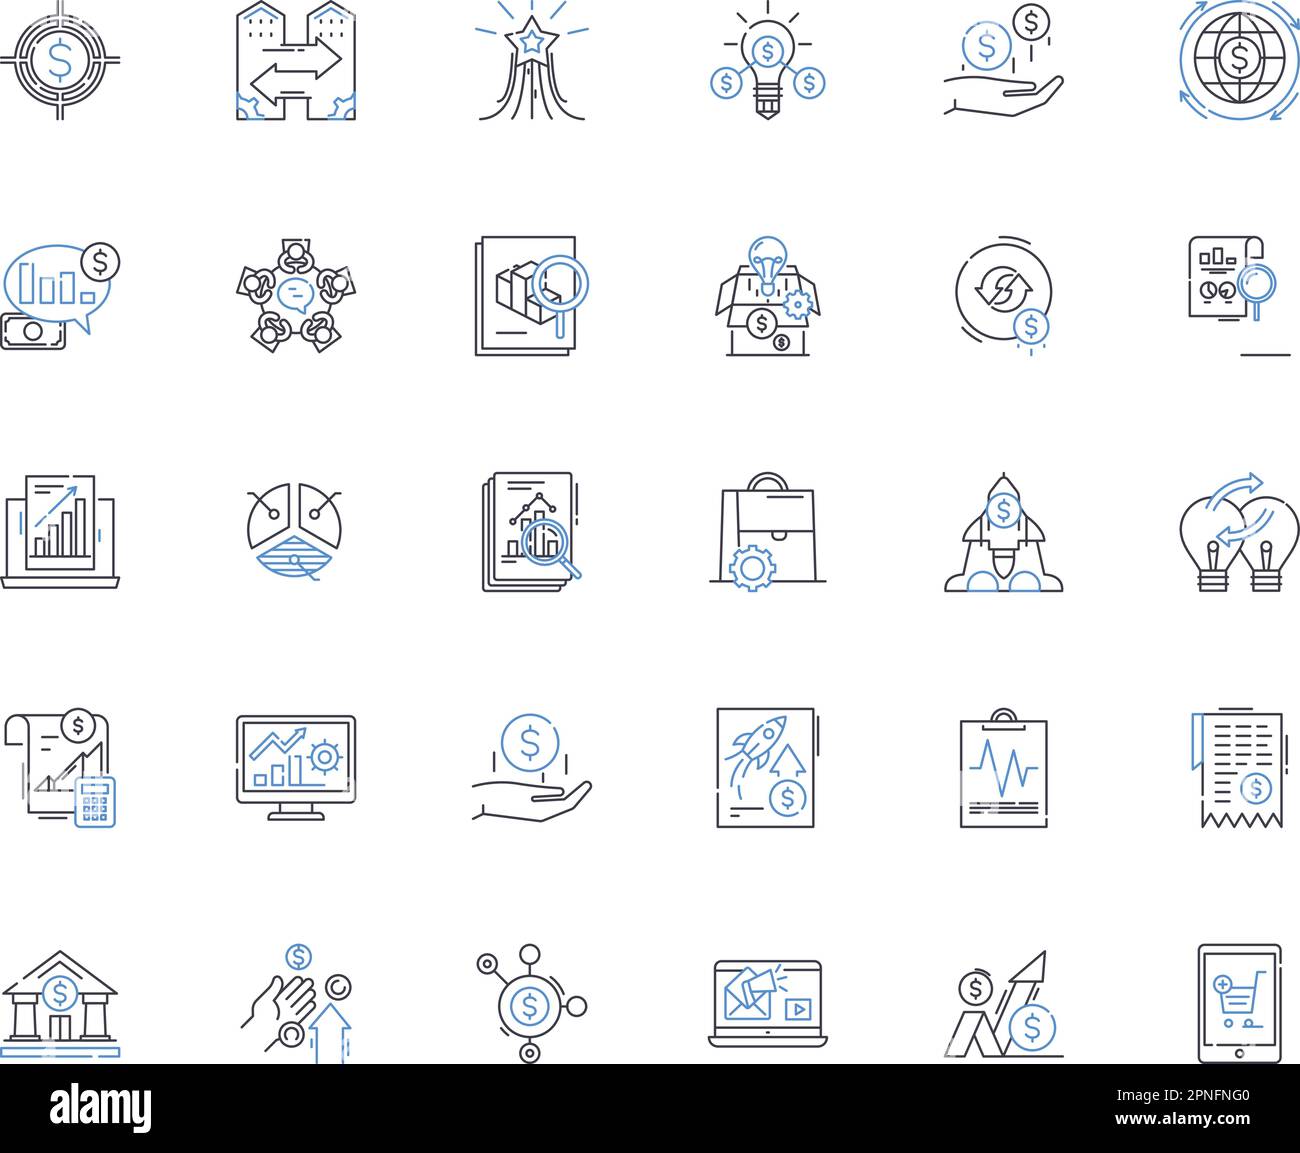 Company worth line icons collection. Valuation, Investment, Assets, Shares, Equity, Growth, Revenue vector and linear illustration. Market cap,Profit Stock Vector